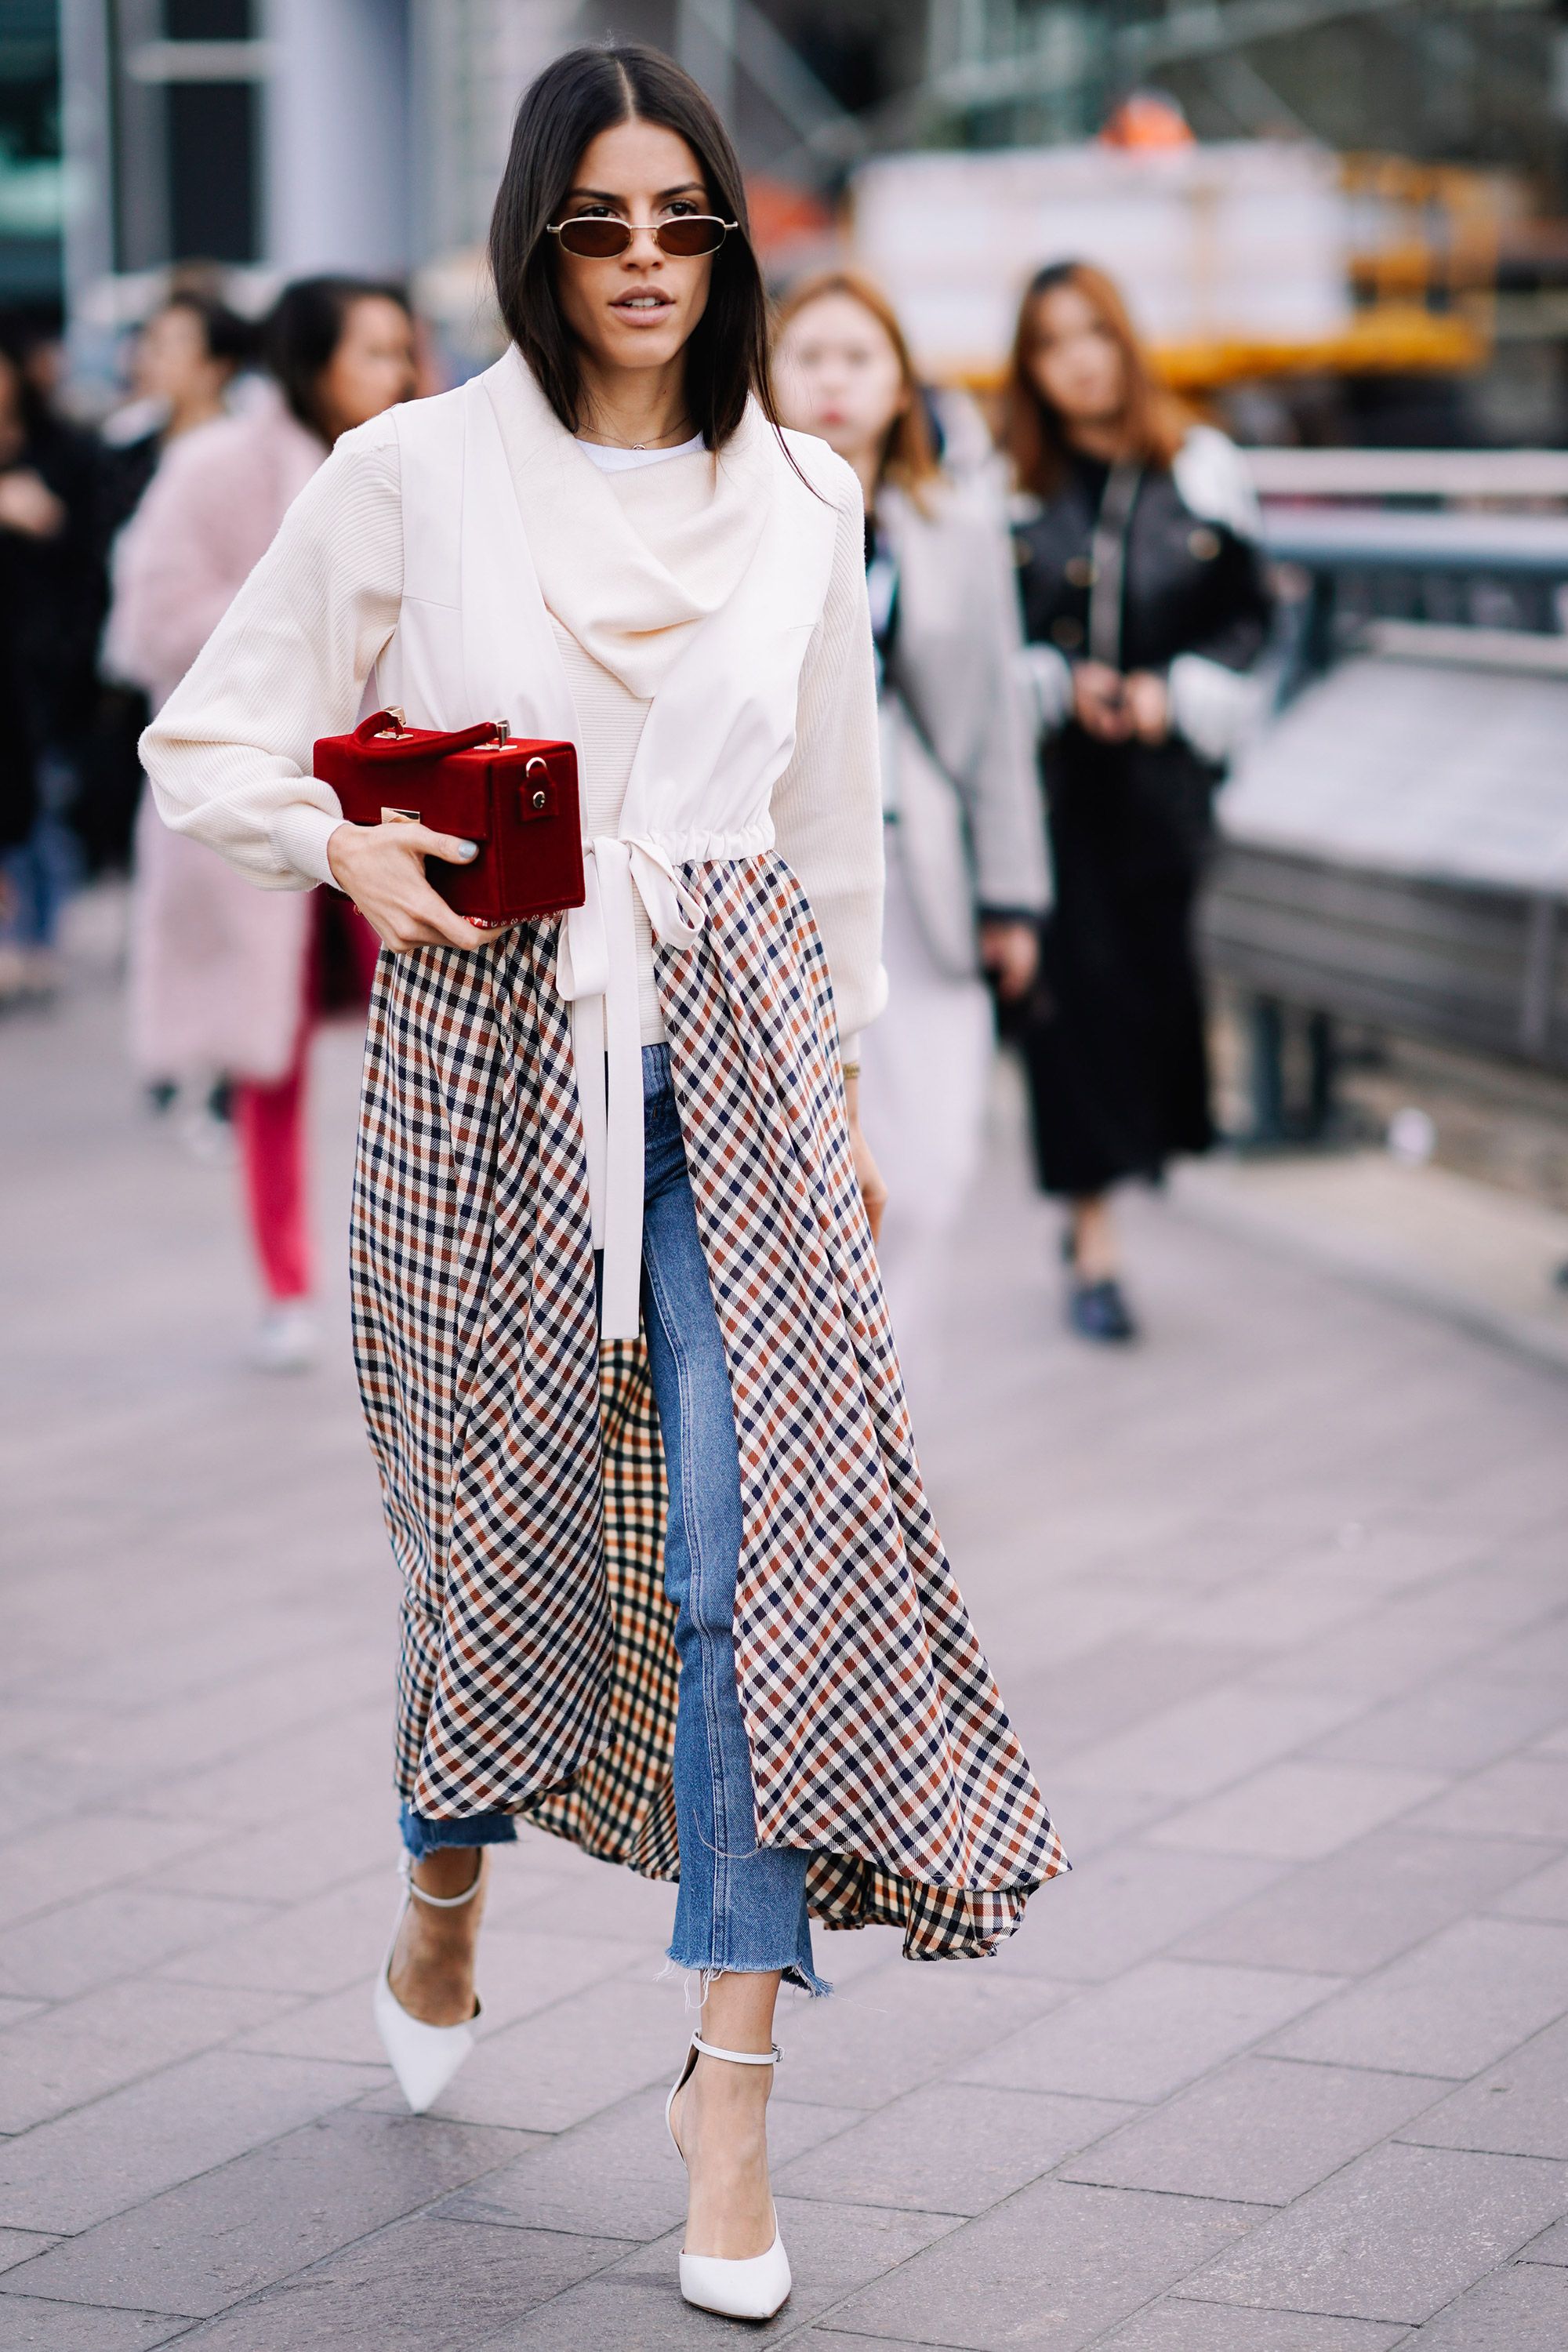 Layer Up Like a Street Styler in a Fall Favorite Trend: Skirts Over Pants |  Vogue